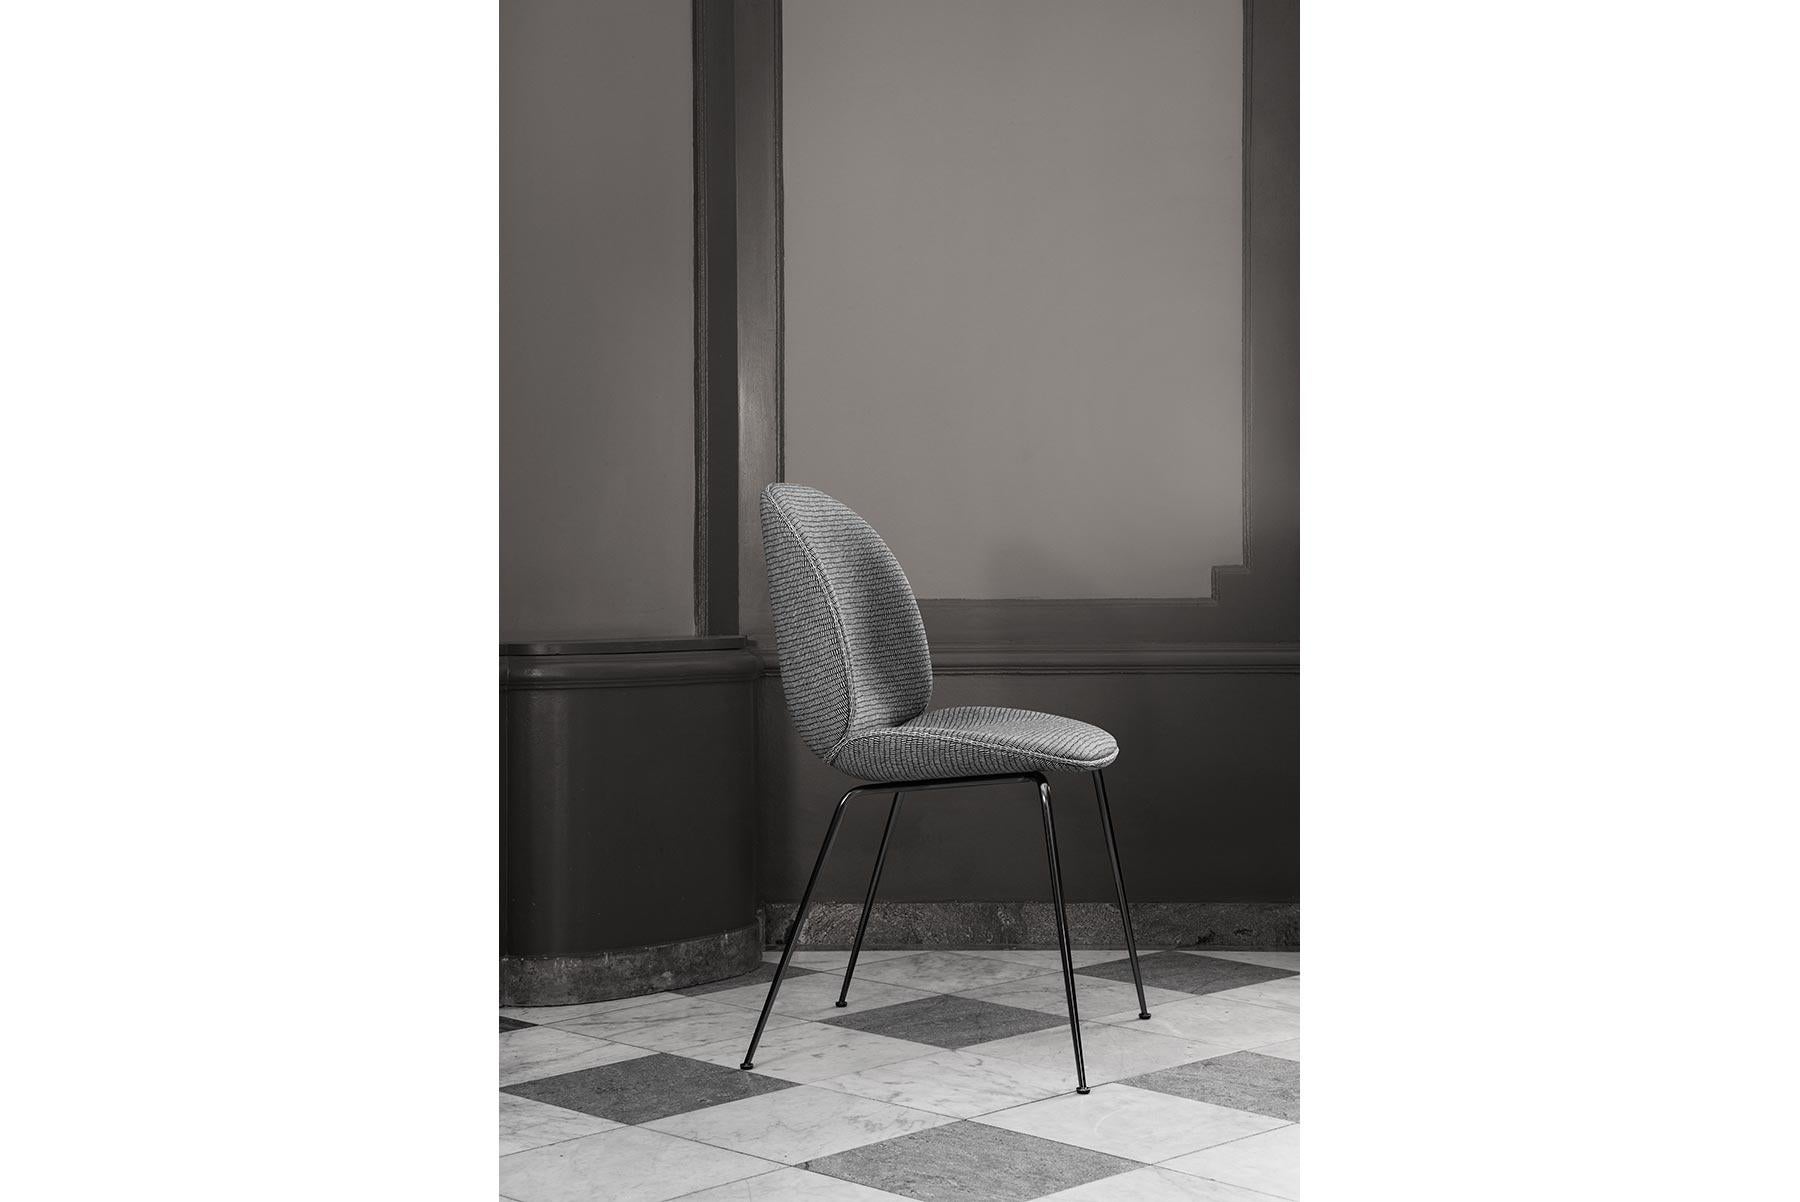 Beetle Dining Chair, Fully Upholstered, Stackable Base, Chrome In New Condition For Sale In Berkeley, CA